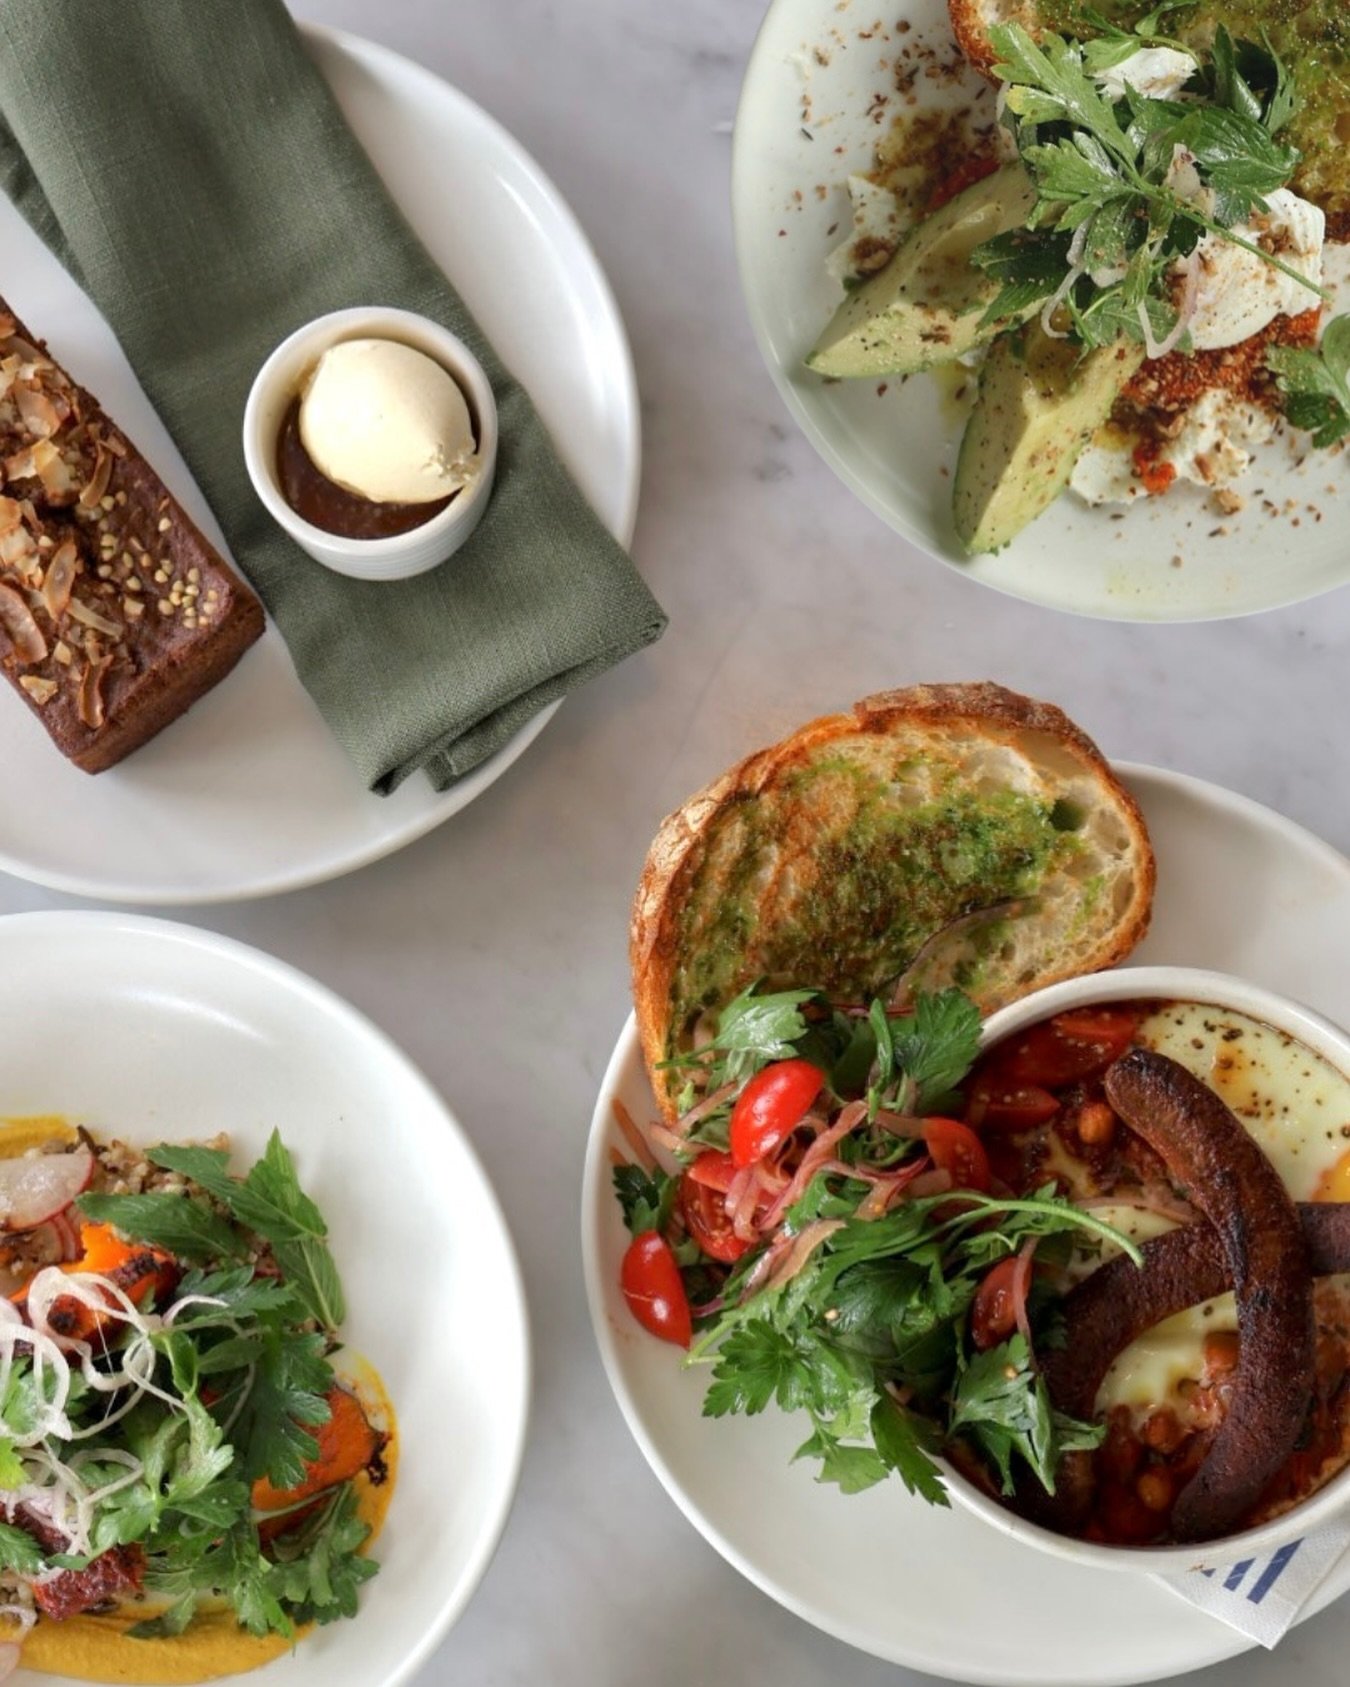 Dive into a fresh new breakfast menu at The Boathouse Shelly Beach, now available. A twist on some of your favourites plus new winter warmers ☕️ 
See you soon!